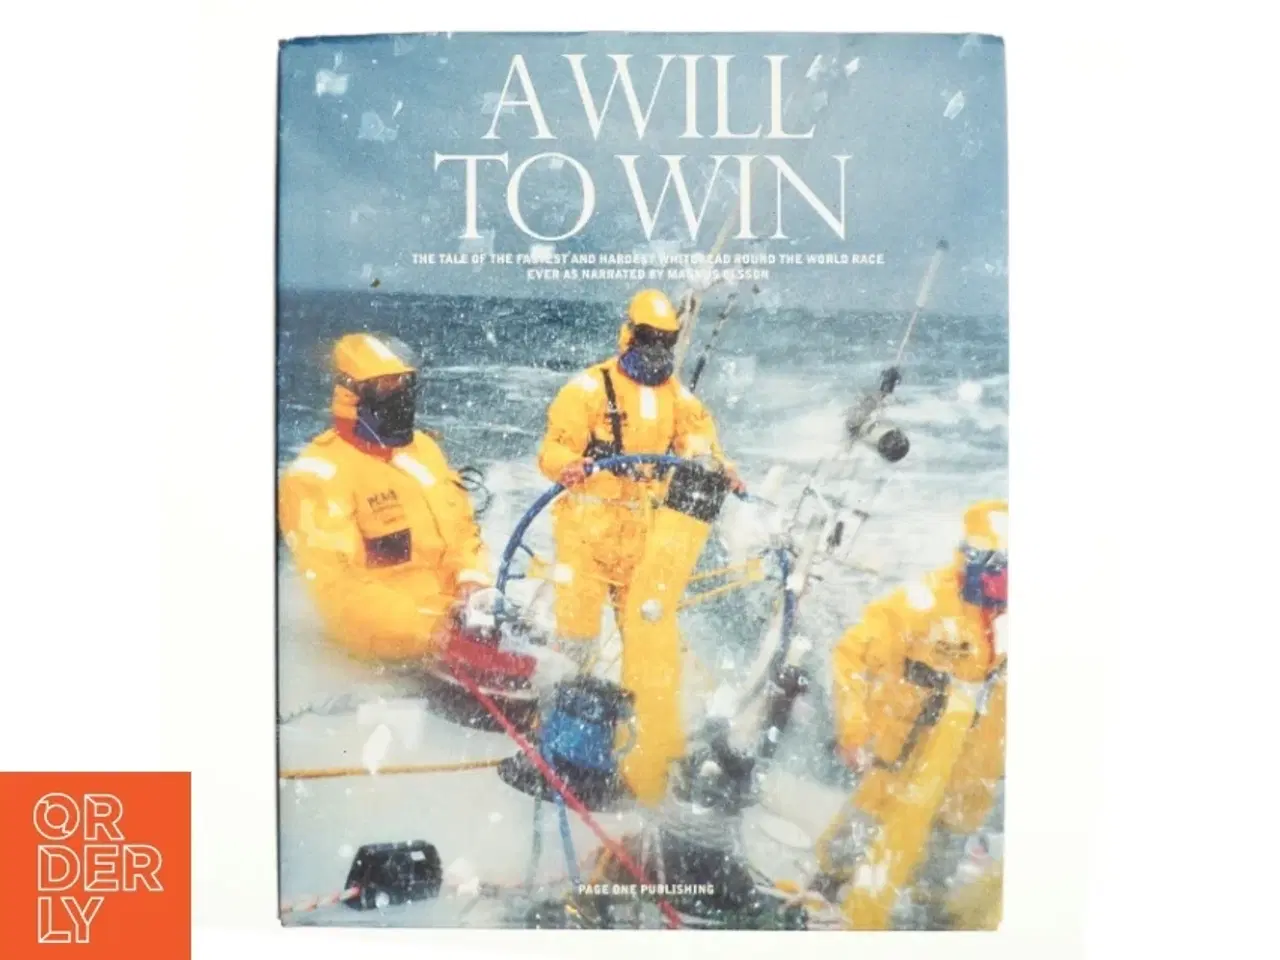 Billede 1 - A will to win. The Tale of the fastest and hardest Whitbread round the World Race ever as narrated by Magnus Olsson 240 s. Gennemillustreret. Original